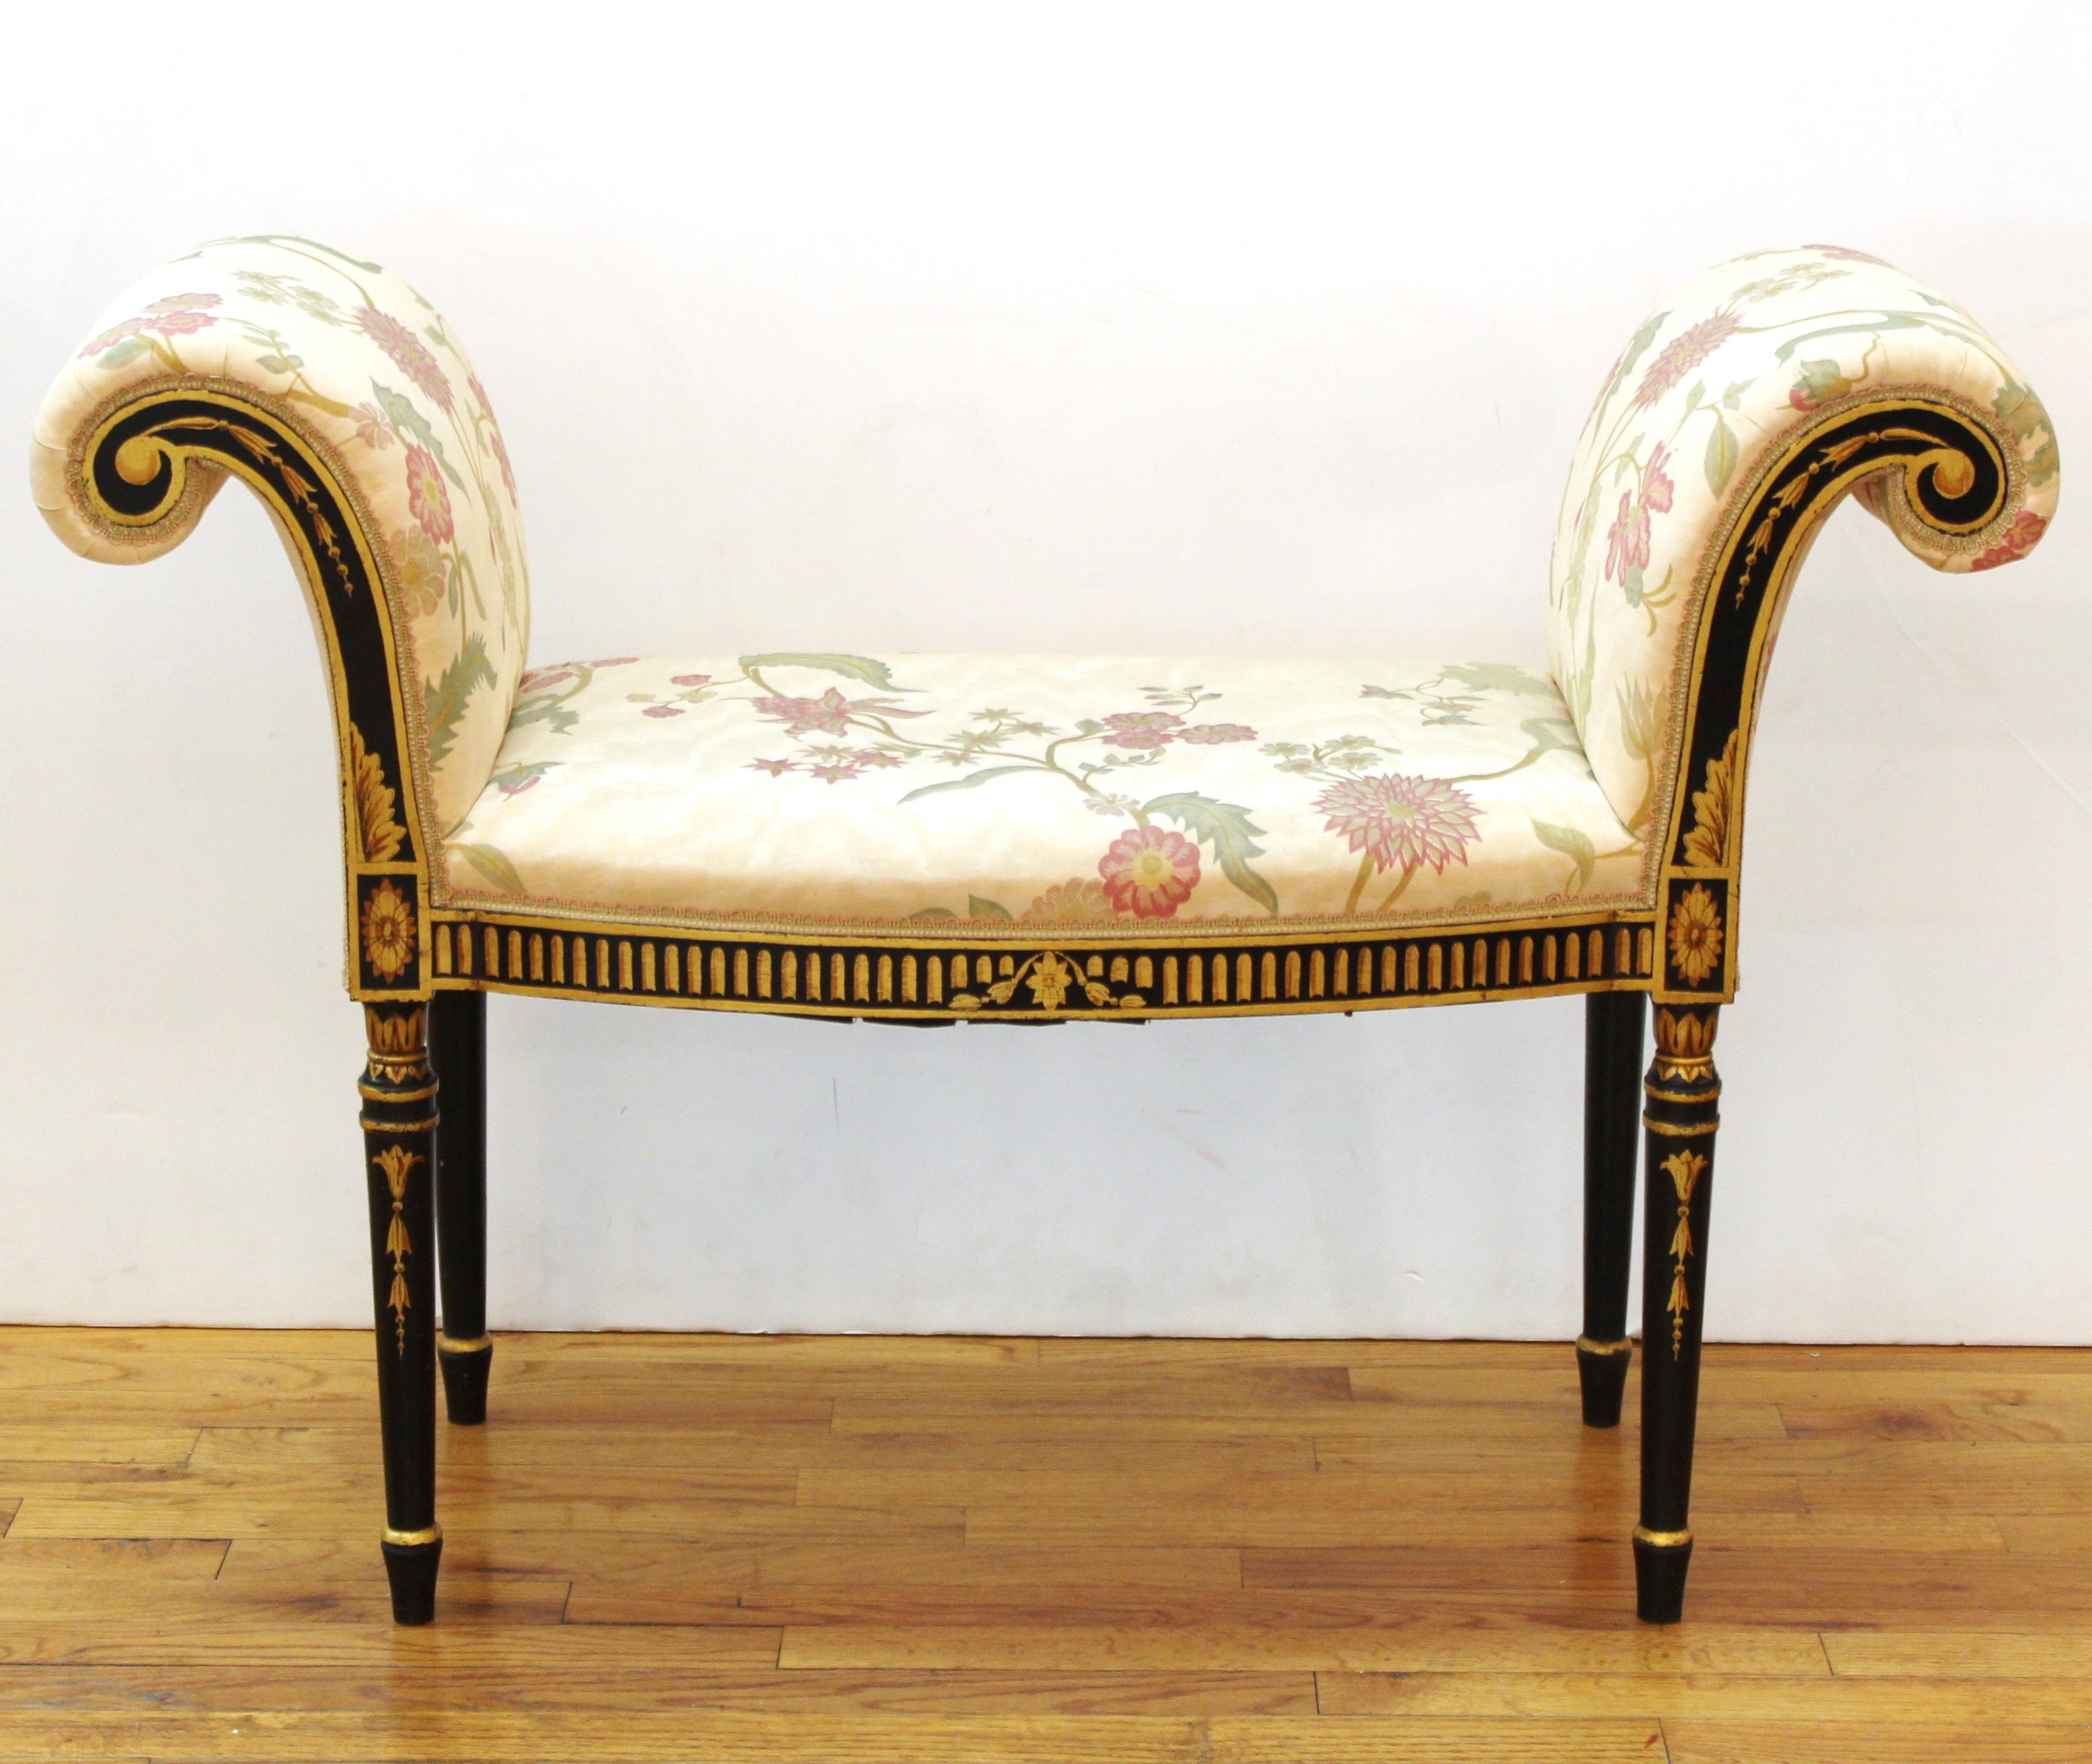 Hepplewhite style pair of upholstered window benches. The pair has decorative gold painted ornament on the front of its ebonized wood structure and scrolled armrests. In great vintage condition with age-appropriate wear and use.